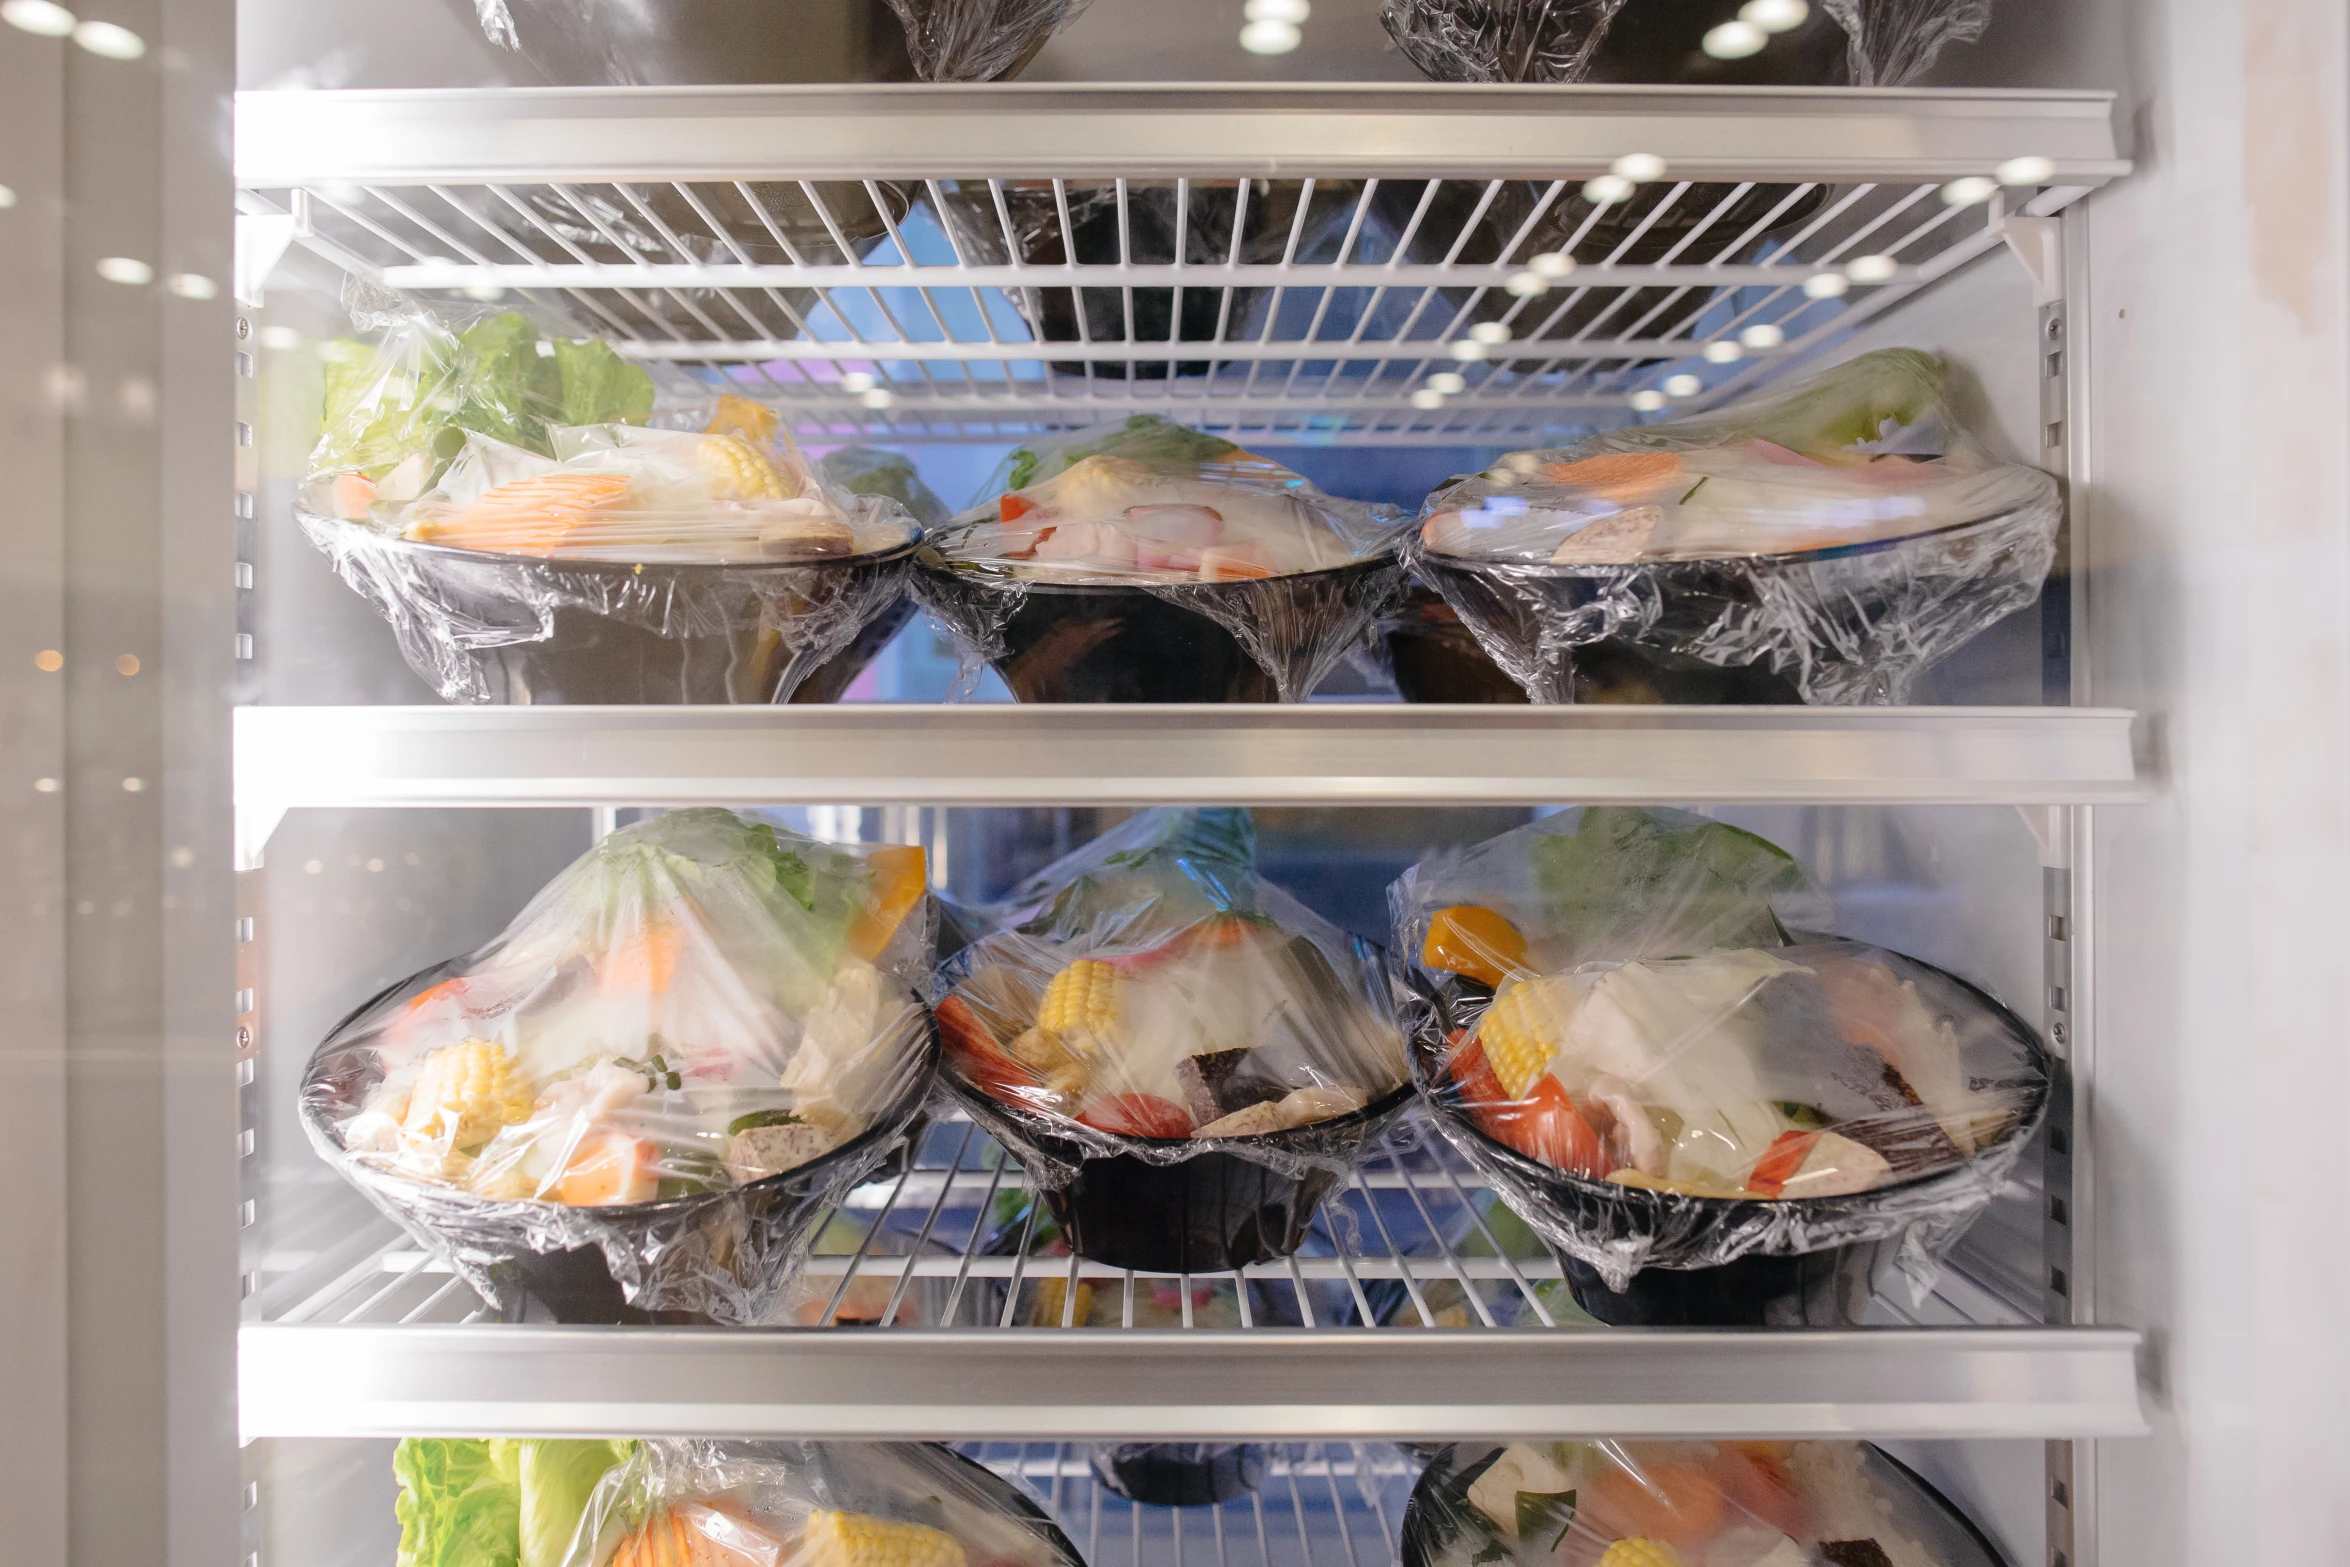 several trays of food are on display in a refrigerator